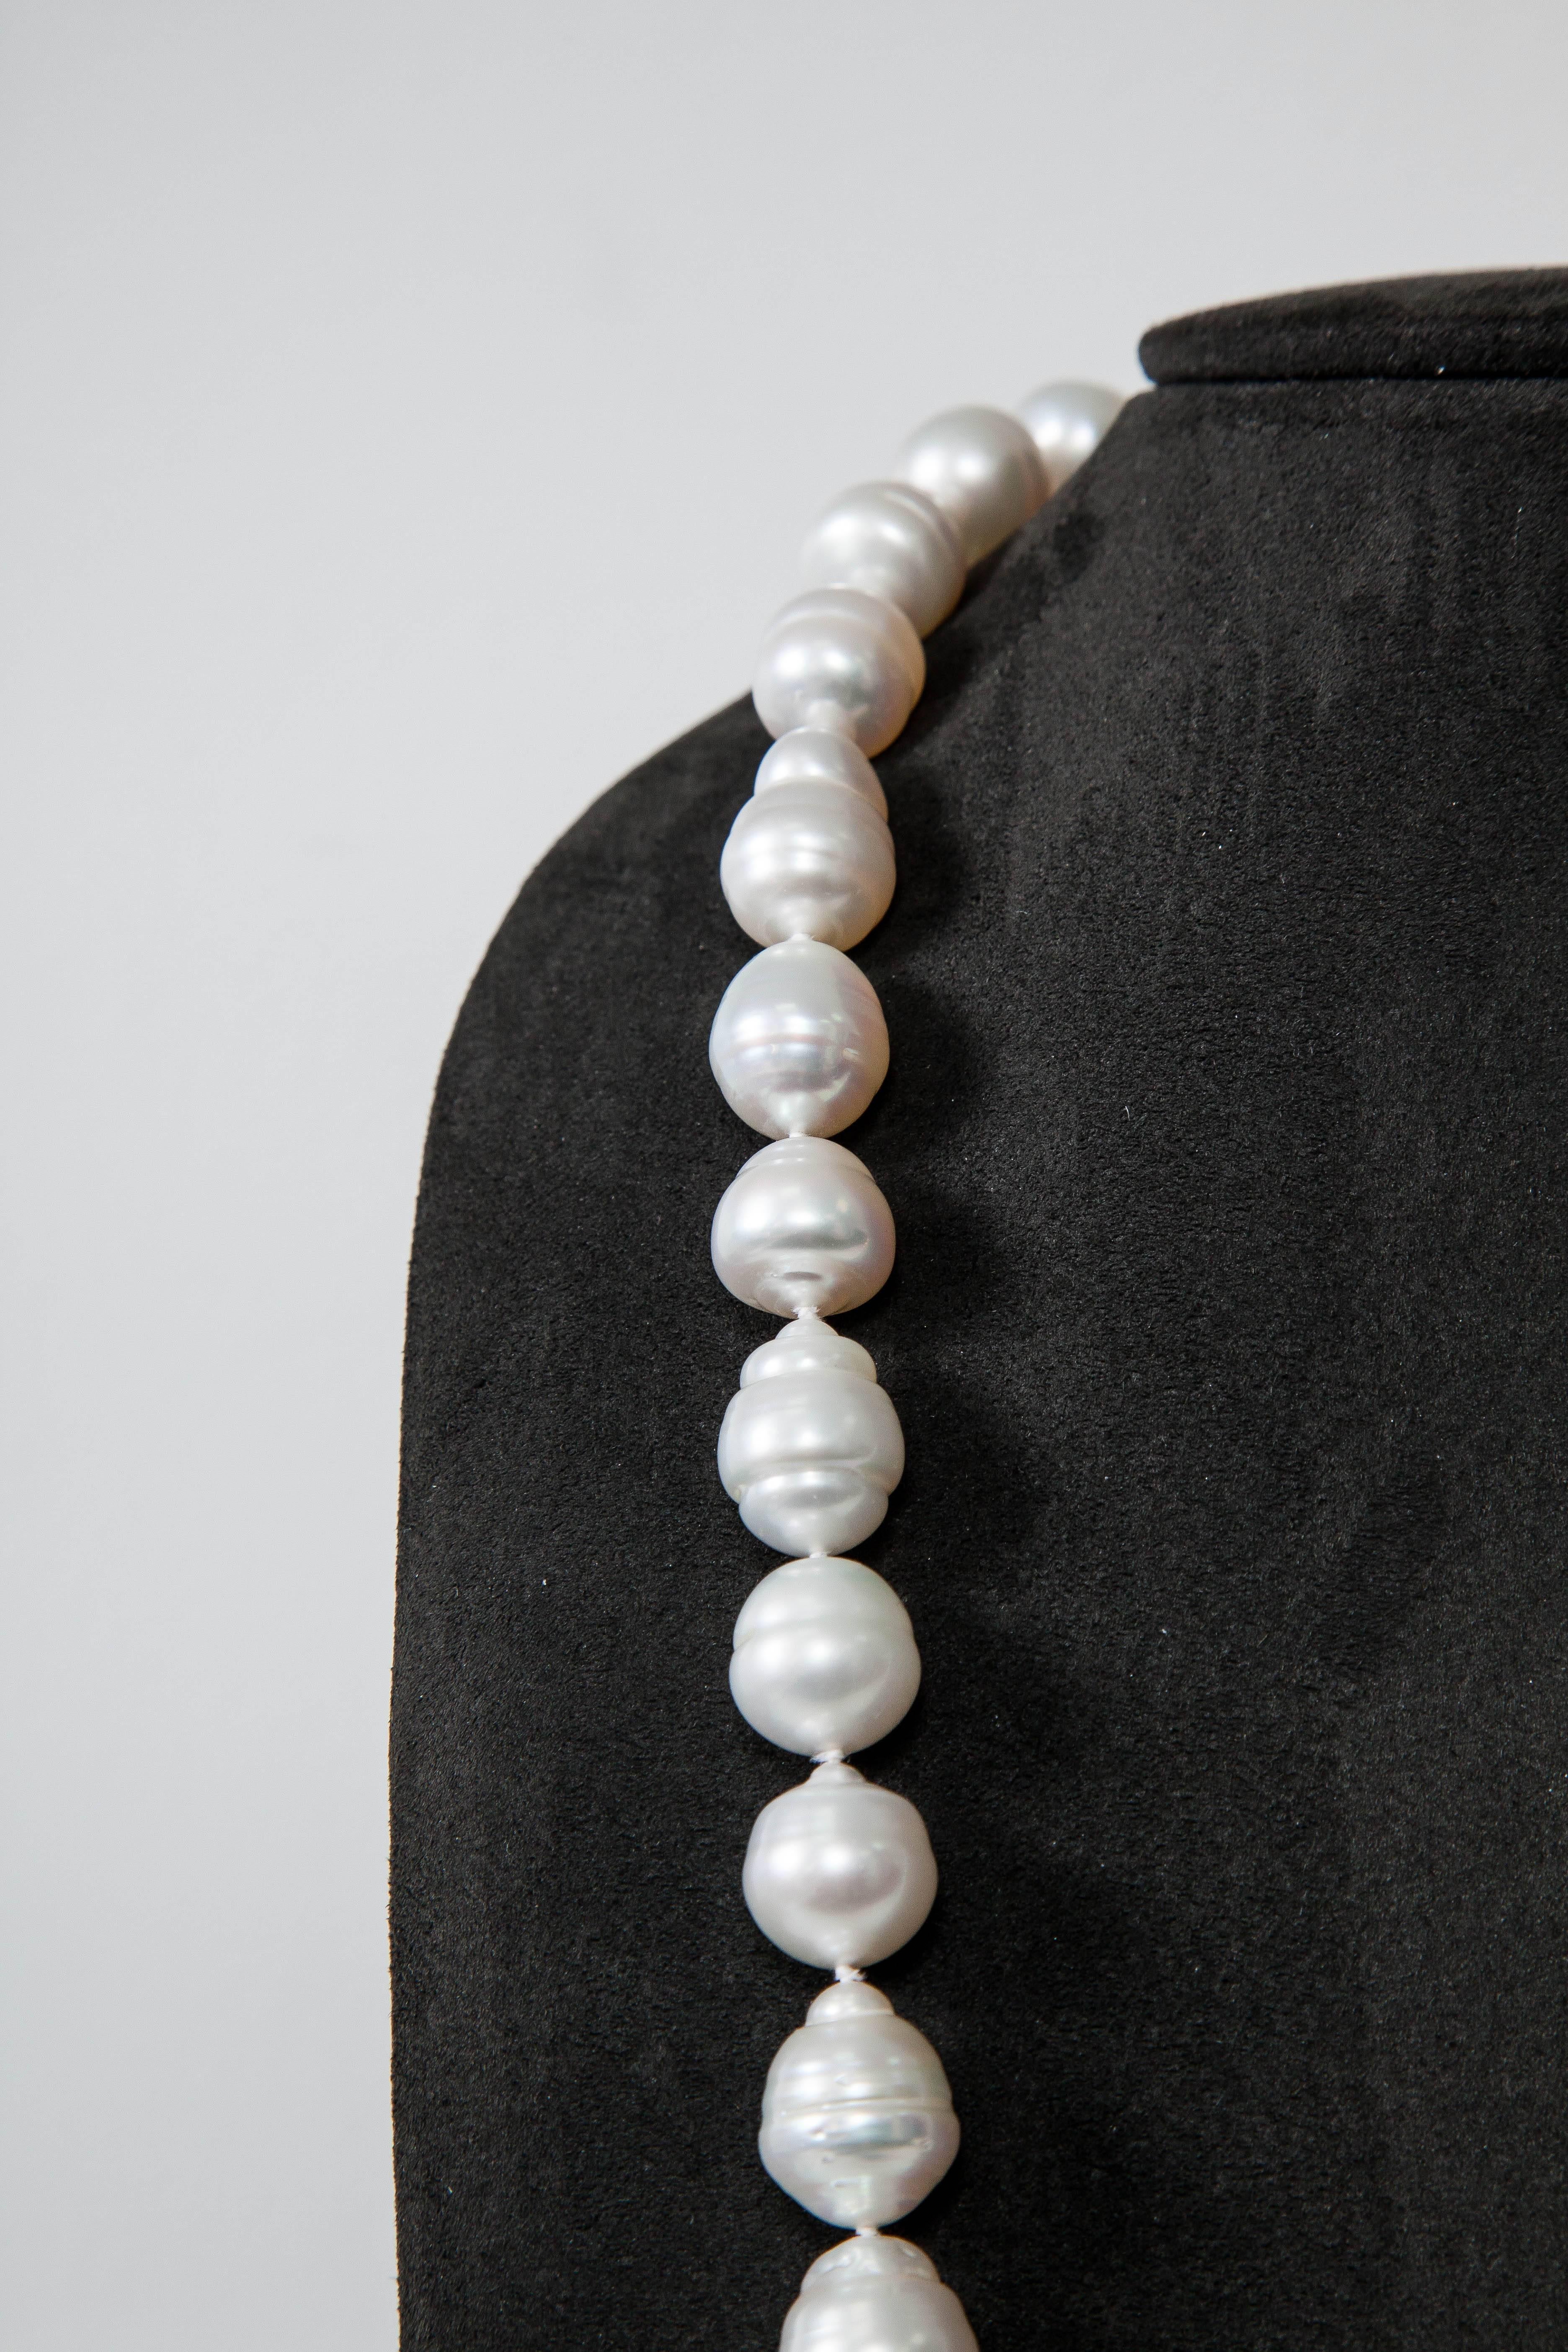 This Baroque Necklace  has 49 Beautiful Pearls  ranging from 13 mm to 18 mm
Opera length 34